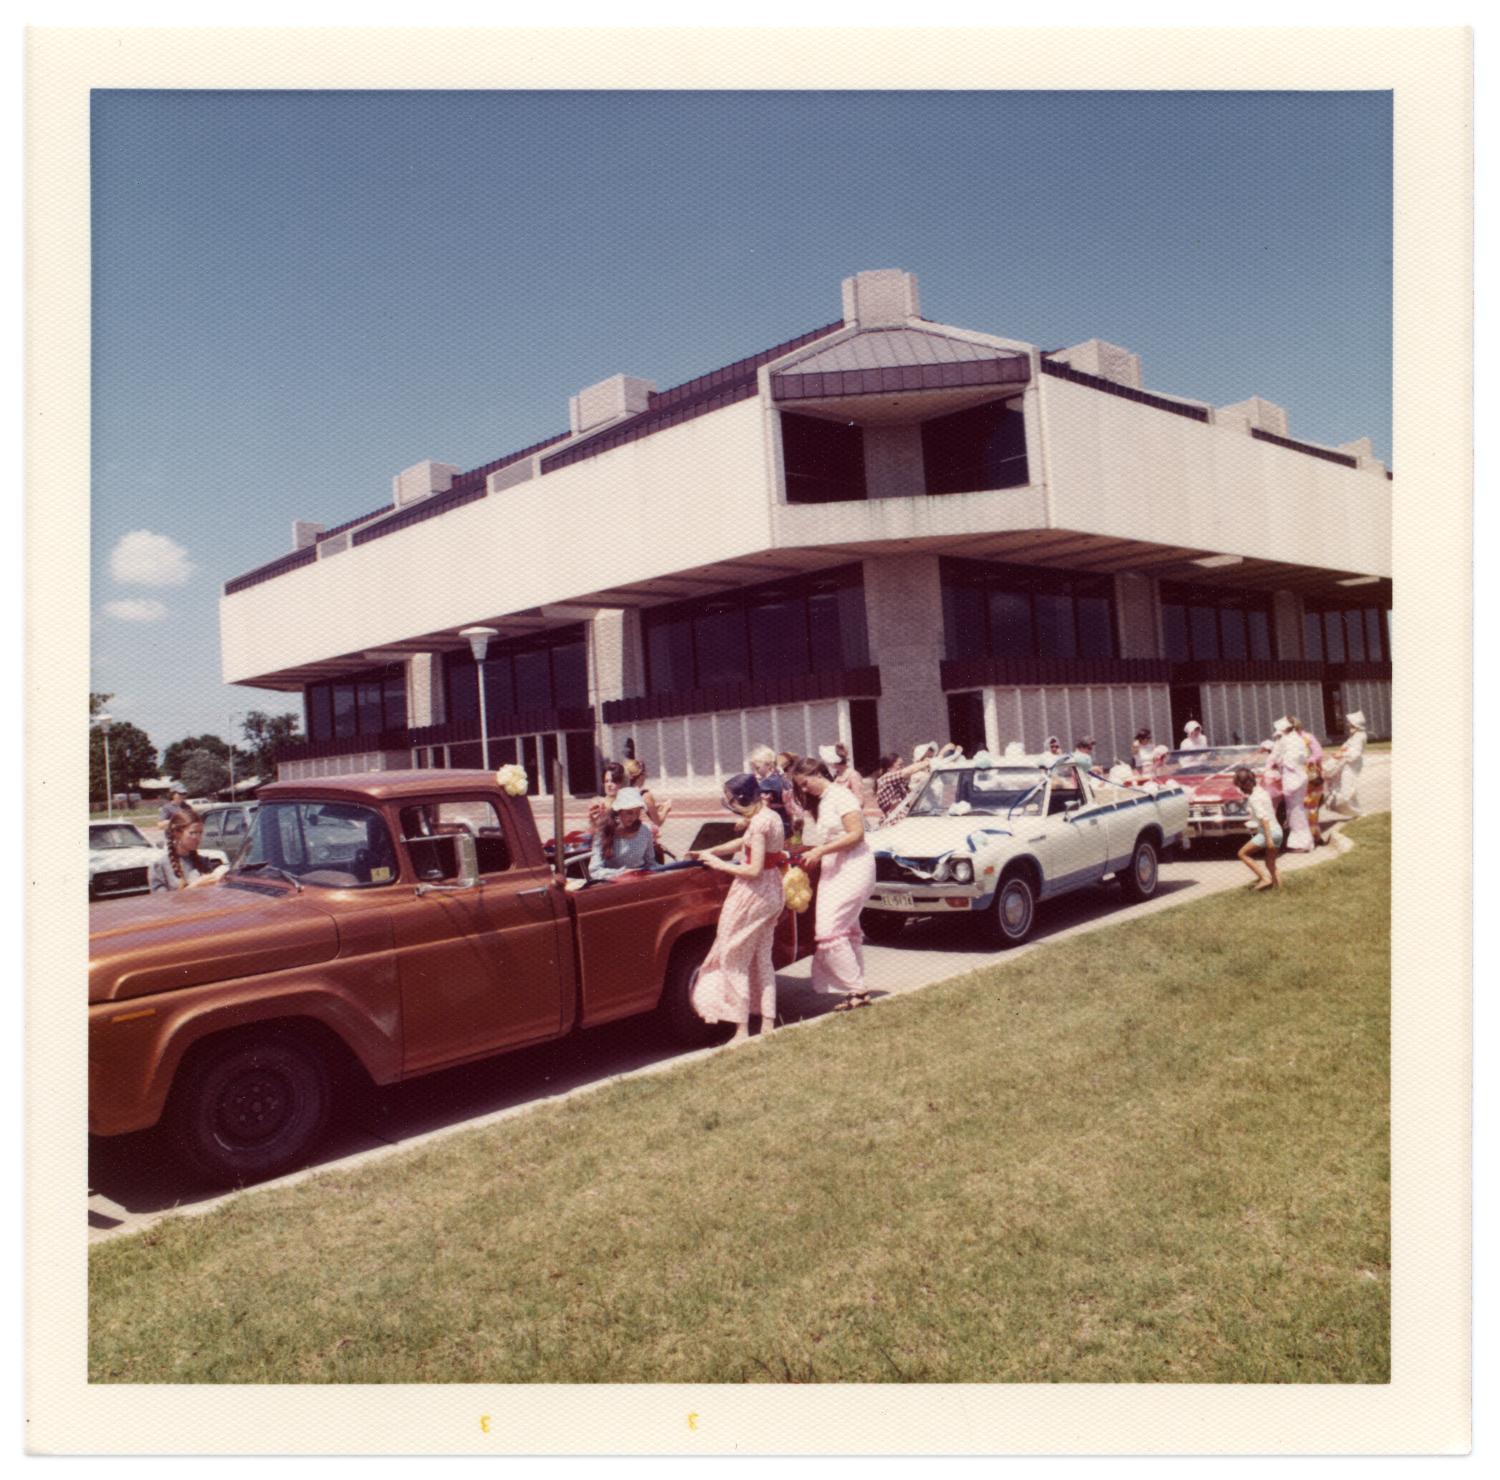 Richardson Centennial Parade, Photograph of a line of parked trucks waiting to participate in the Centennial parade. A group of women are gathered around the back of a copper-colored truck. To the right of the truck, there is a white truck and red convertible with a crowd around them. In the background, there is a building identified as Richardson Public Library., 